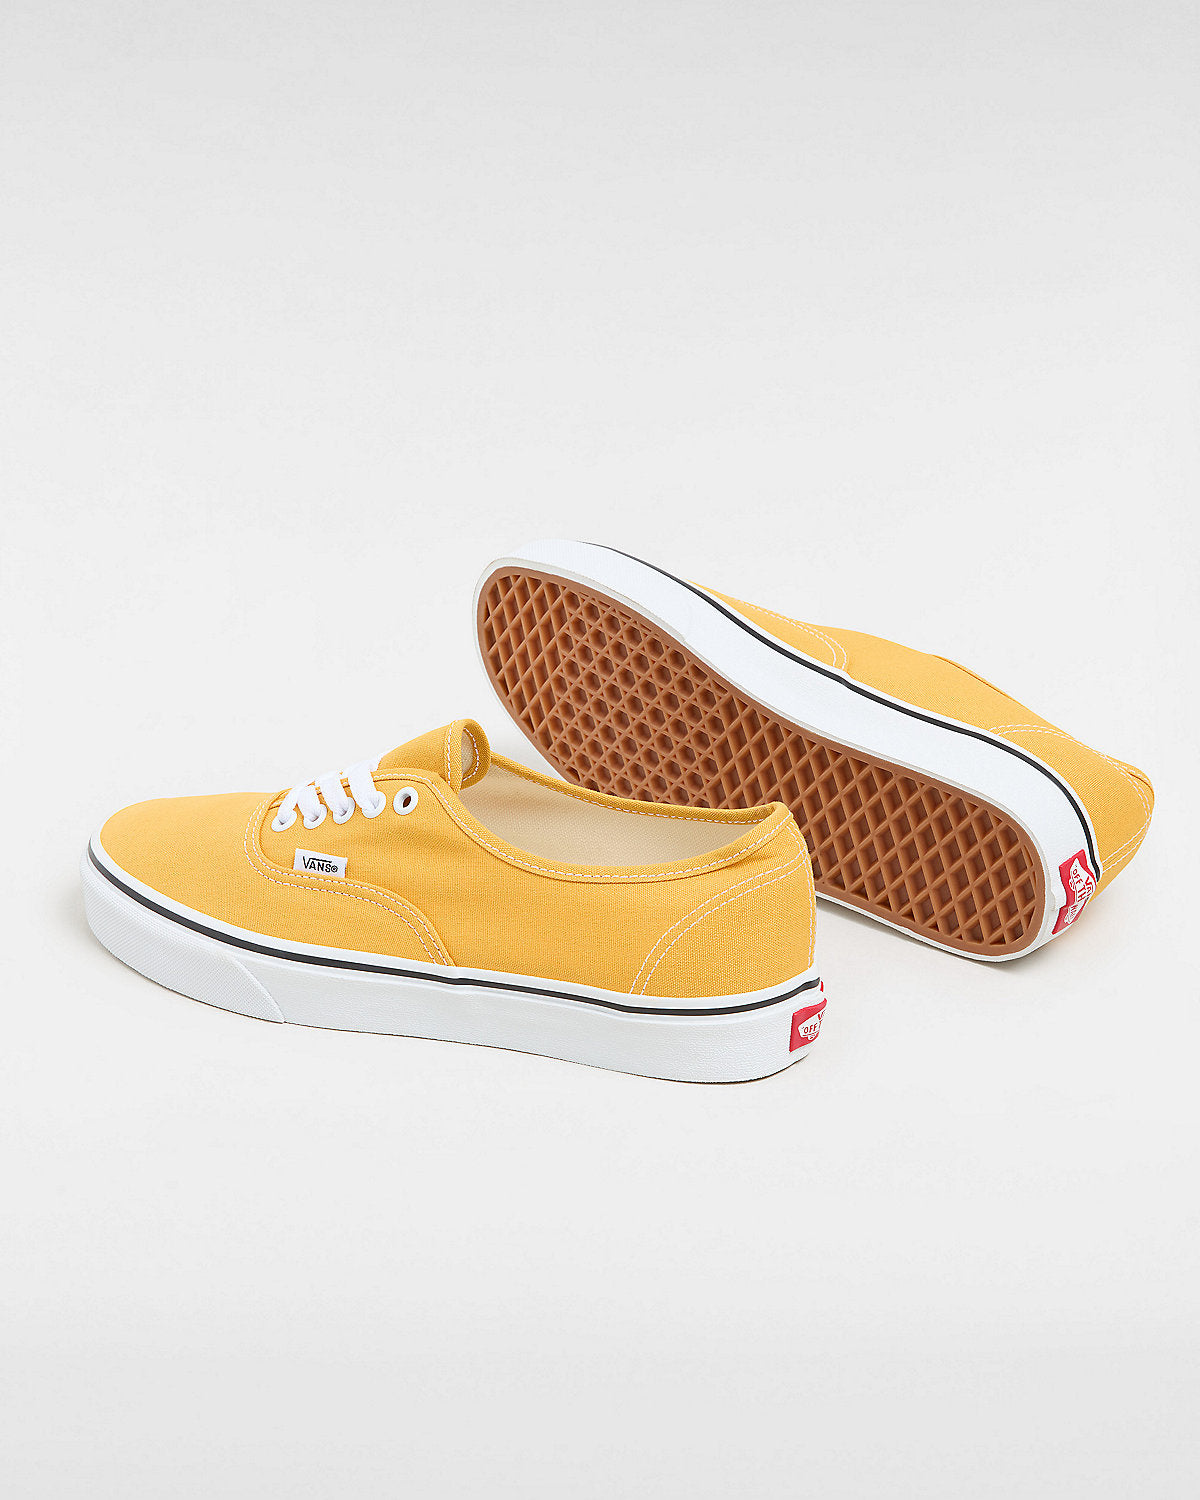 VANS Unisex Authentic Color Theory Trainers - Golden Glow